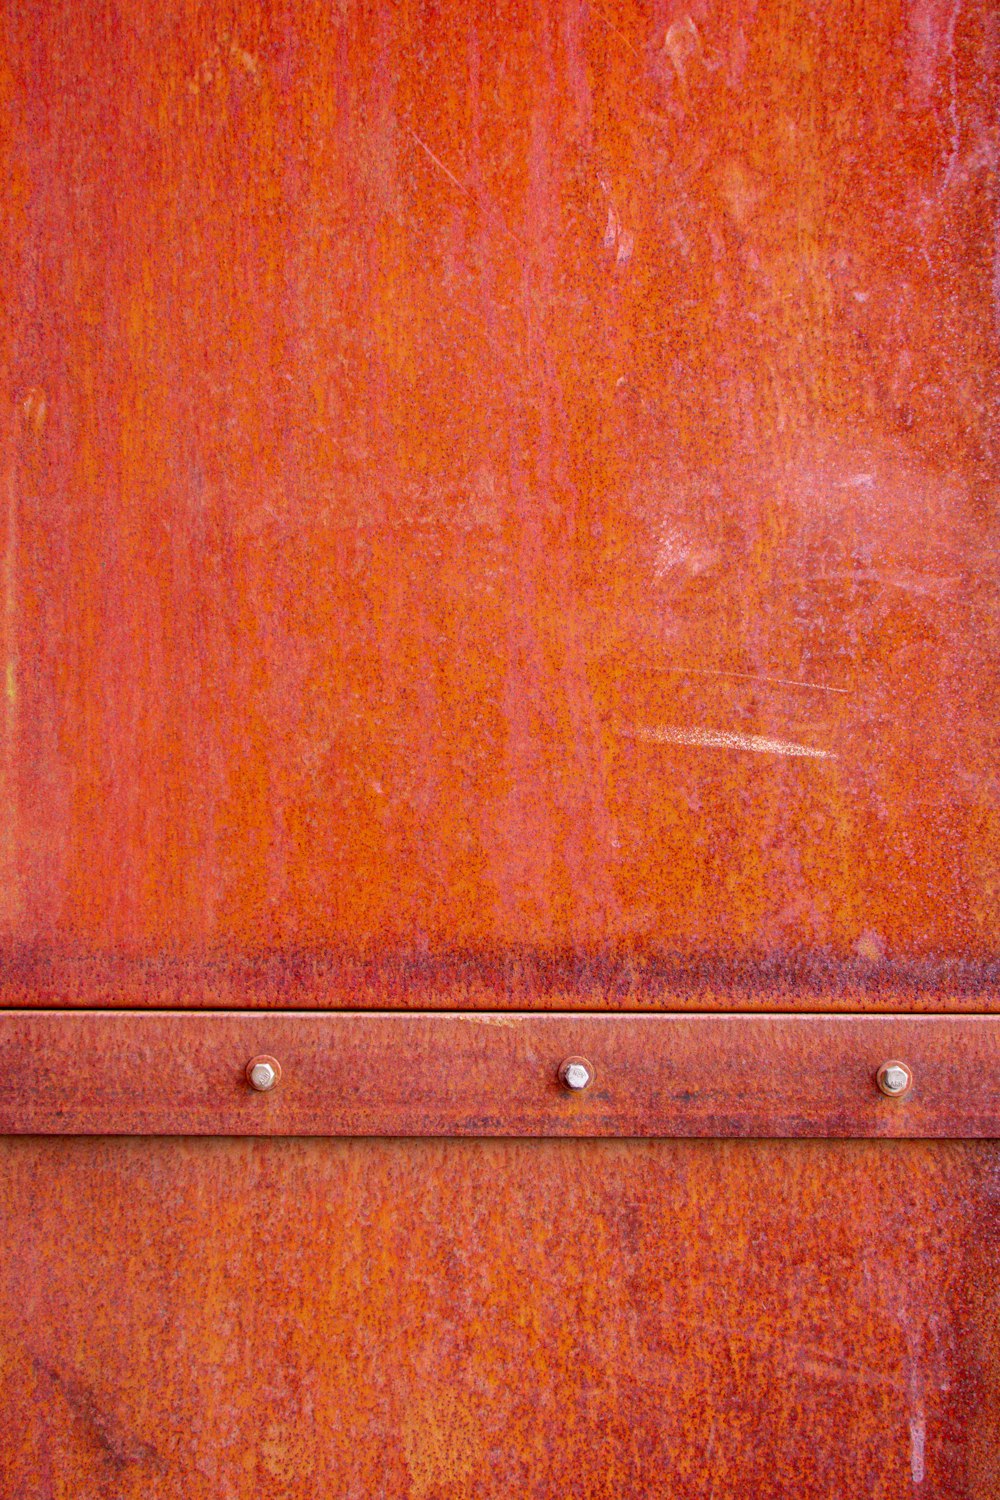 a close up of a red metal surface with rivets